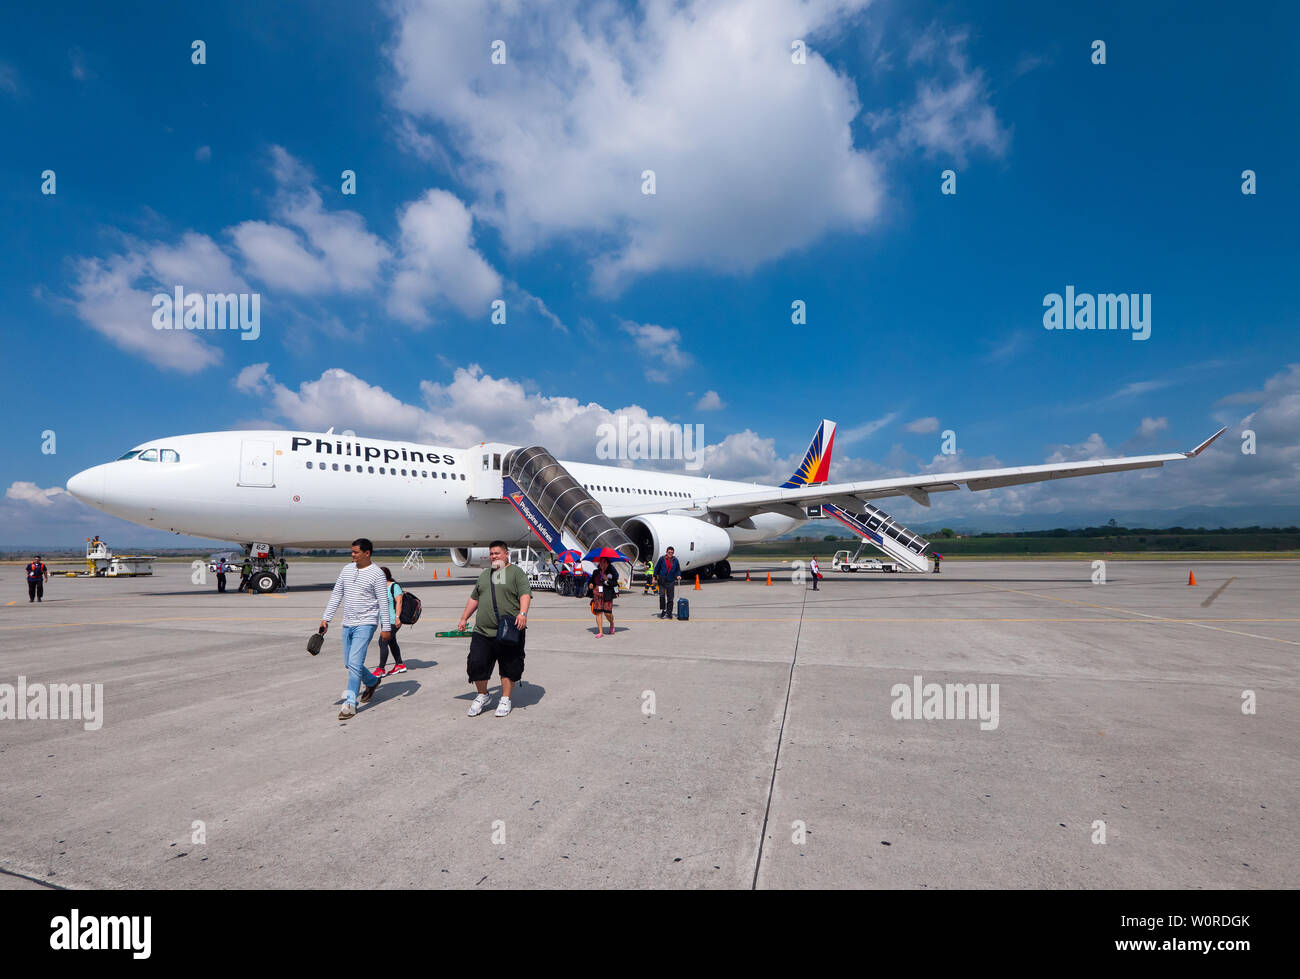 General Santos City, the Philippines - May 22, 2019: Philippine Airlines Airbus A330 after arrival in General Santos City, the southernmost city of th Stock Photo